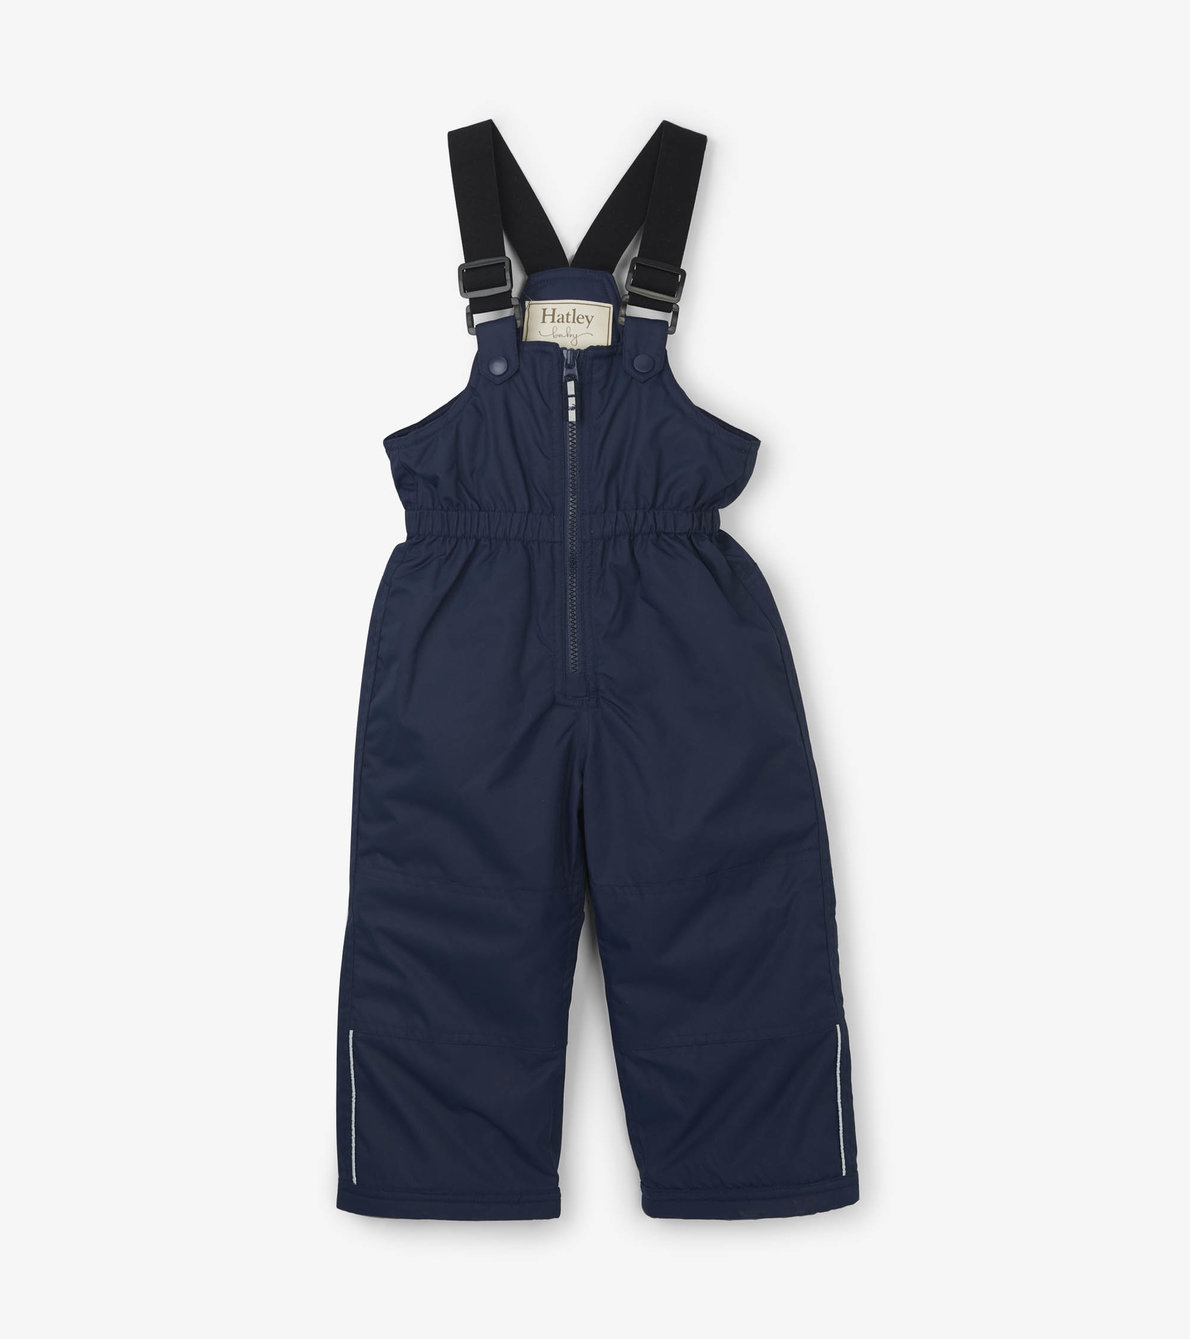 View larger image of Band of Bears Baby Snowsuit Set